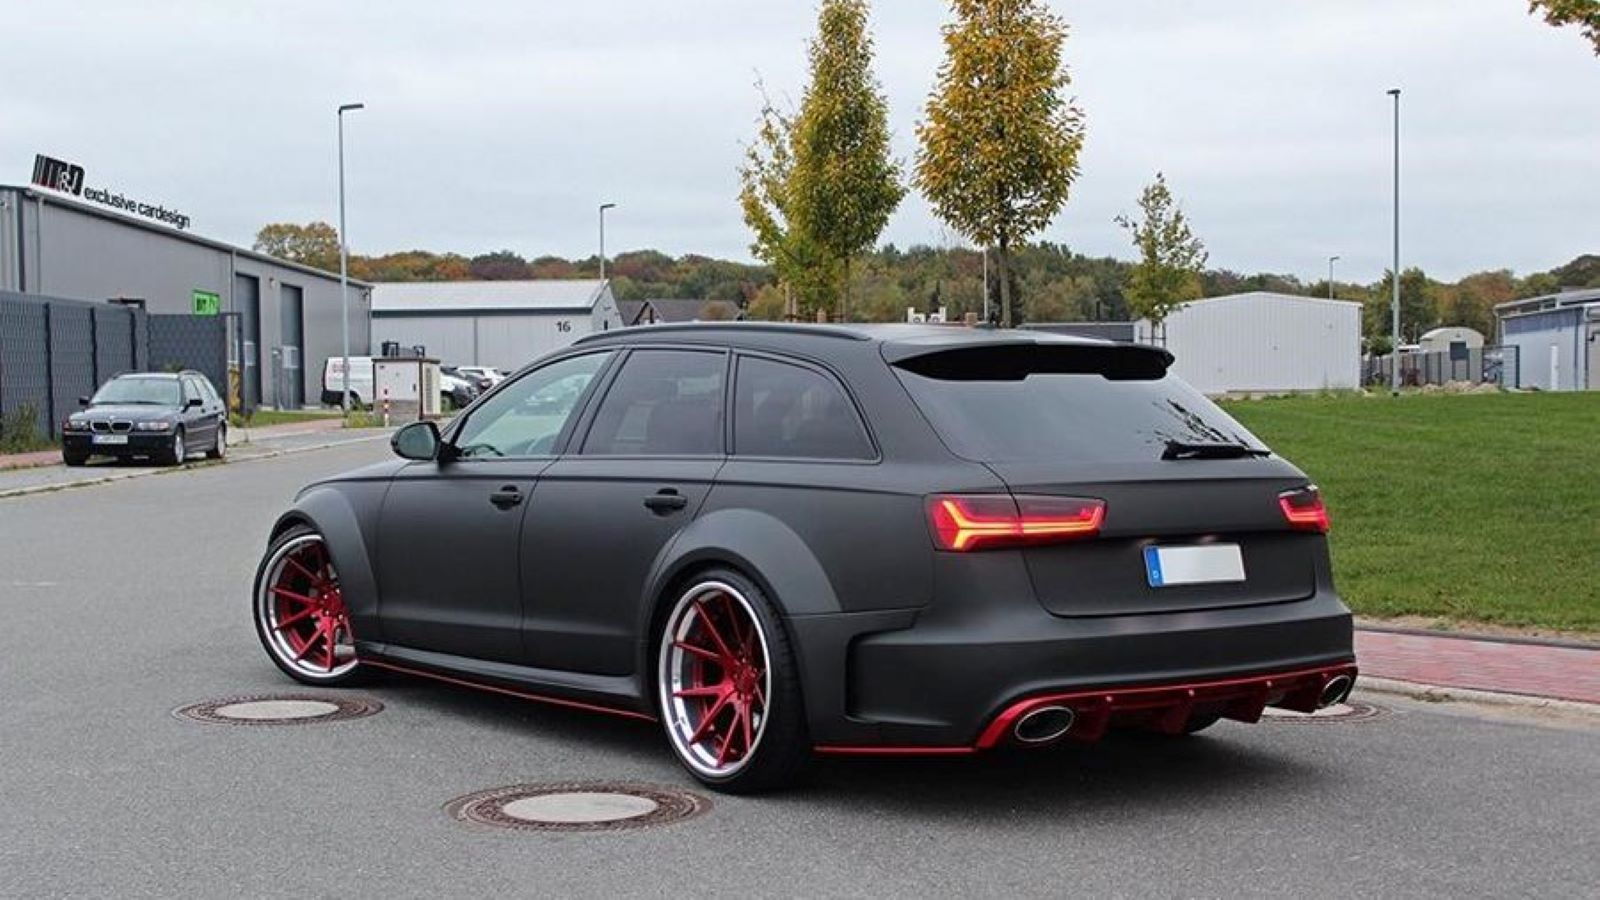 Audi A6 Avant Looks Sinister With New Bodykit And Wheels Audiworld